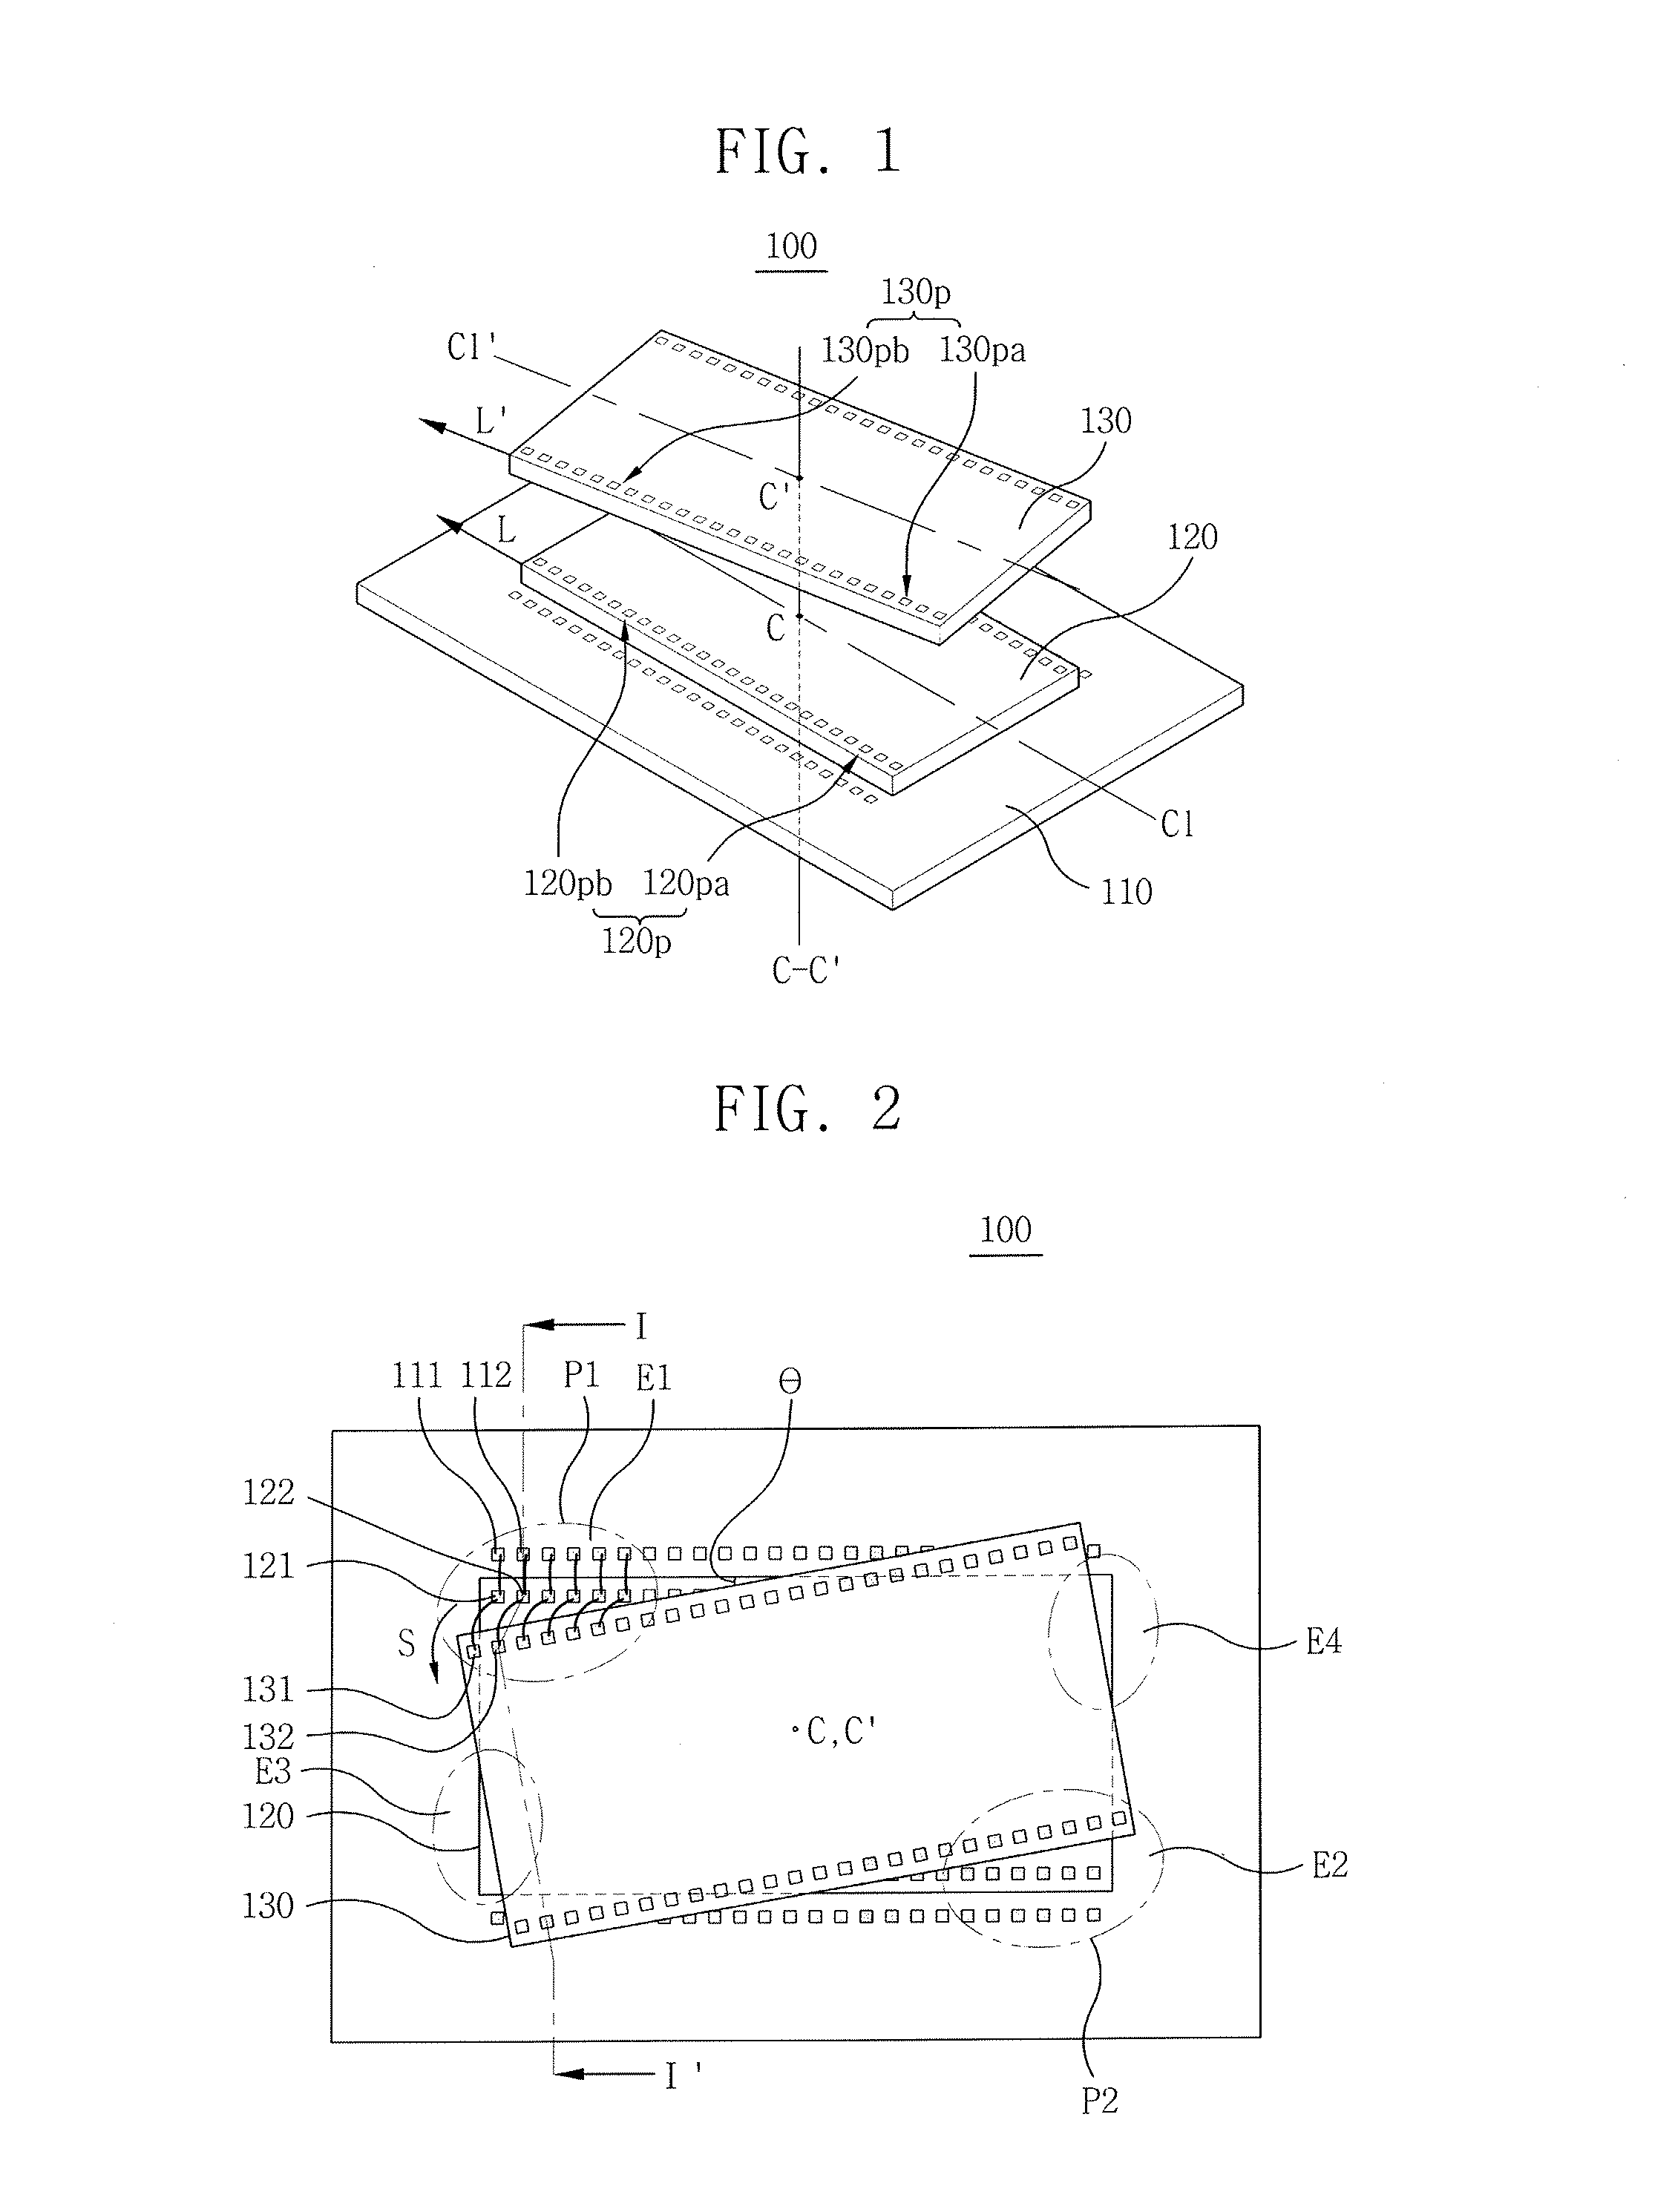 Semiconductor package having a stacked structure